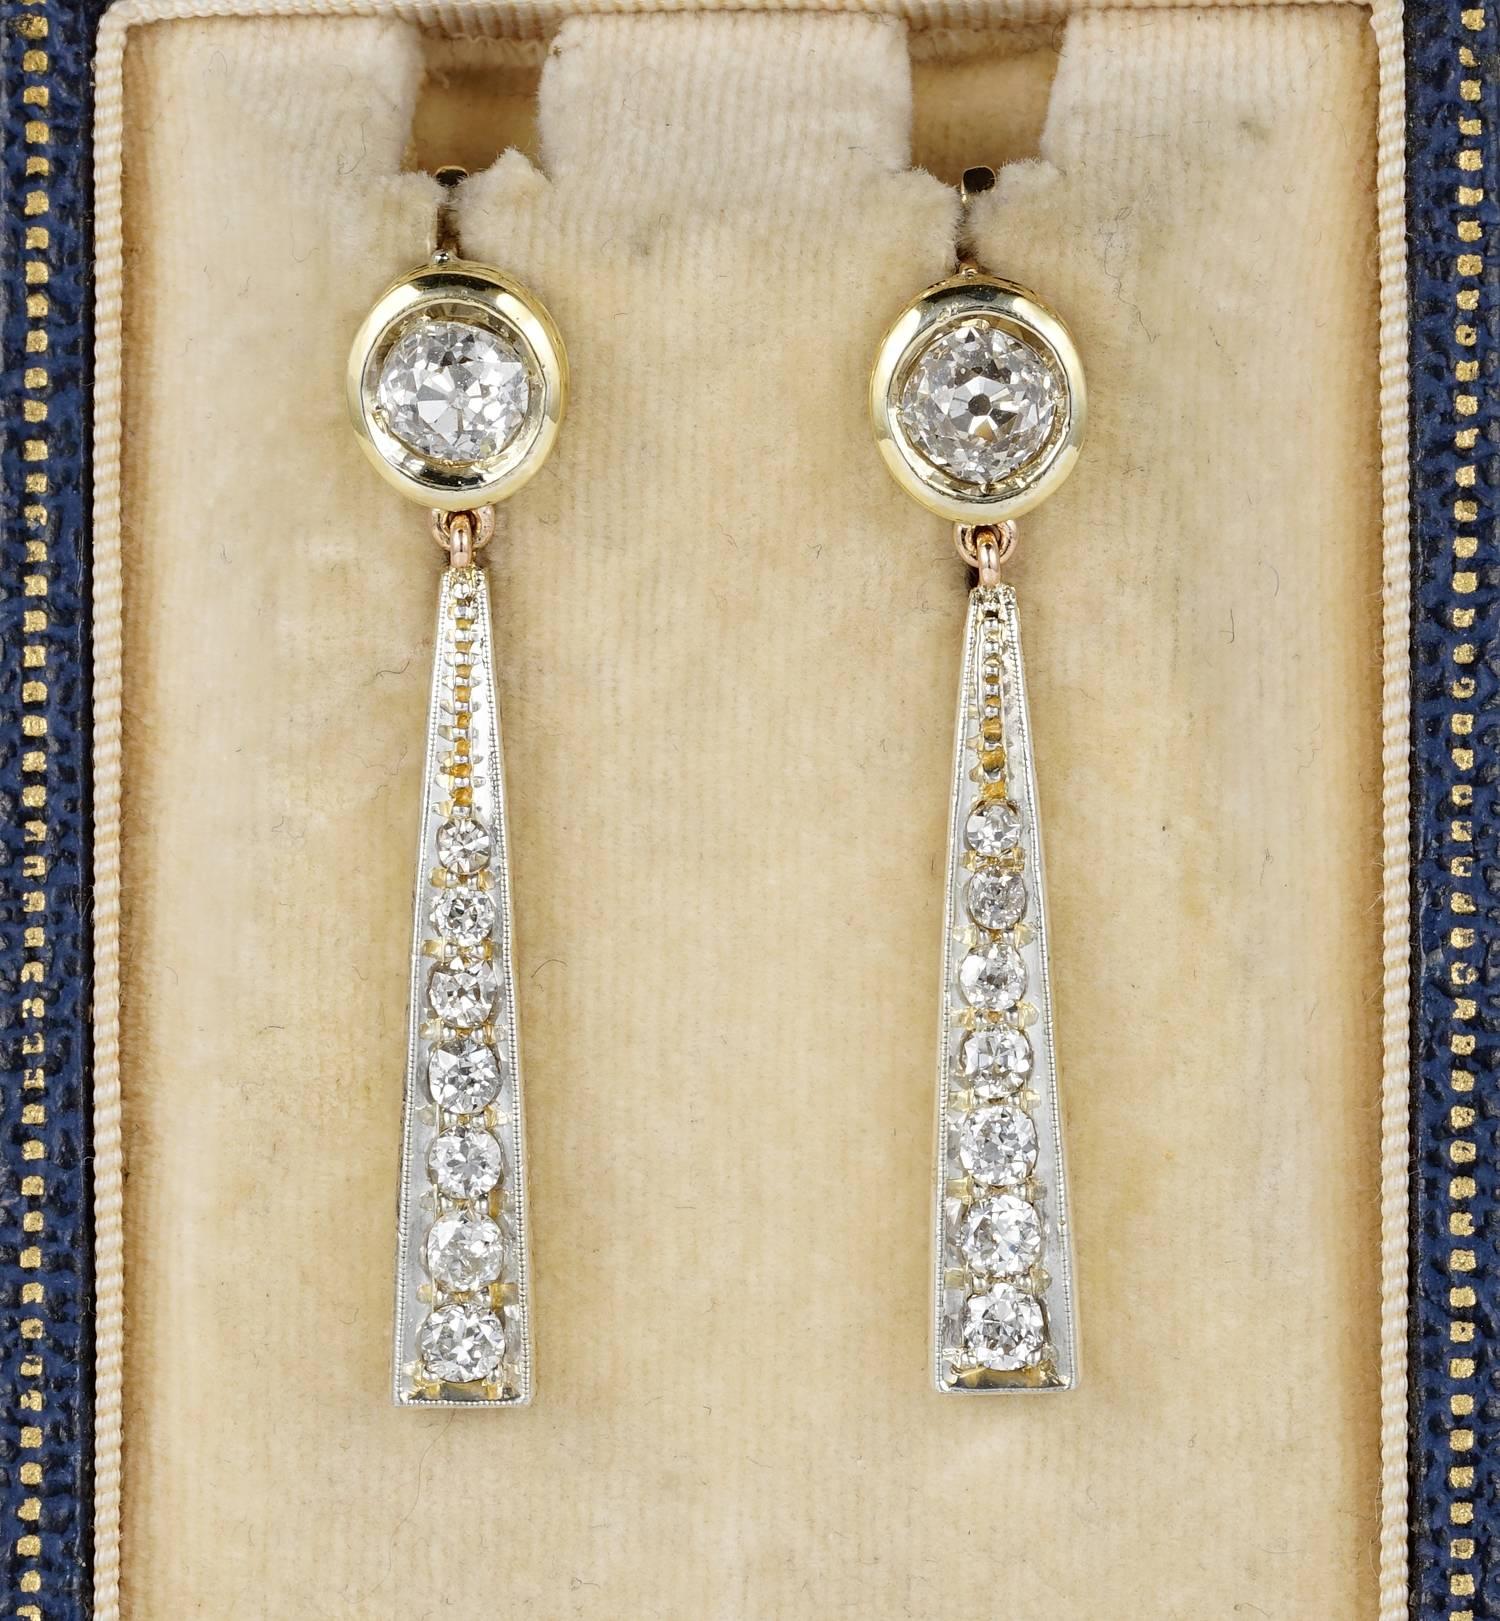 An exquisite pair of Edwardian Diamond drop earrings elegantly designed with a top large Diamodn solitaire and sleek drop od Diamonds.
Refined in design, finely crafted of solid 18 KT gold and Platinum, marked.
Top Diamonds are two oval old mine